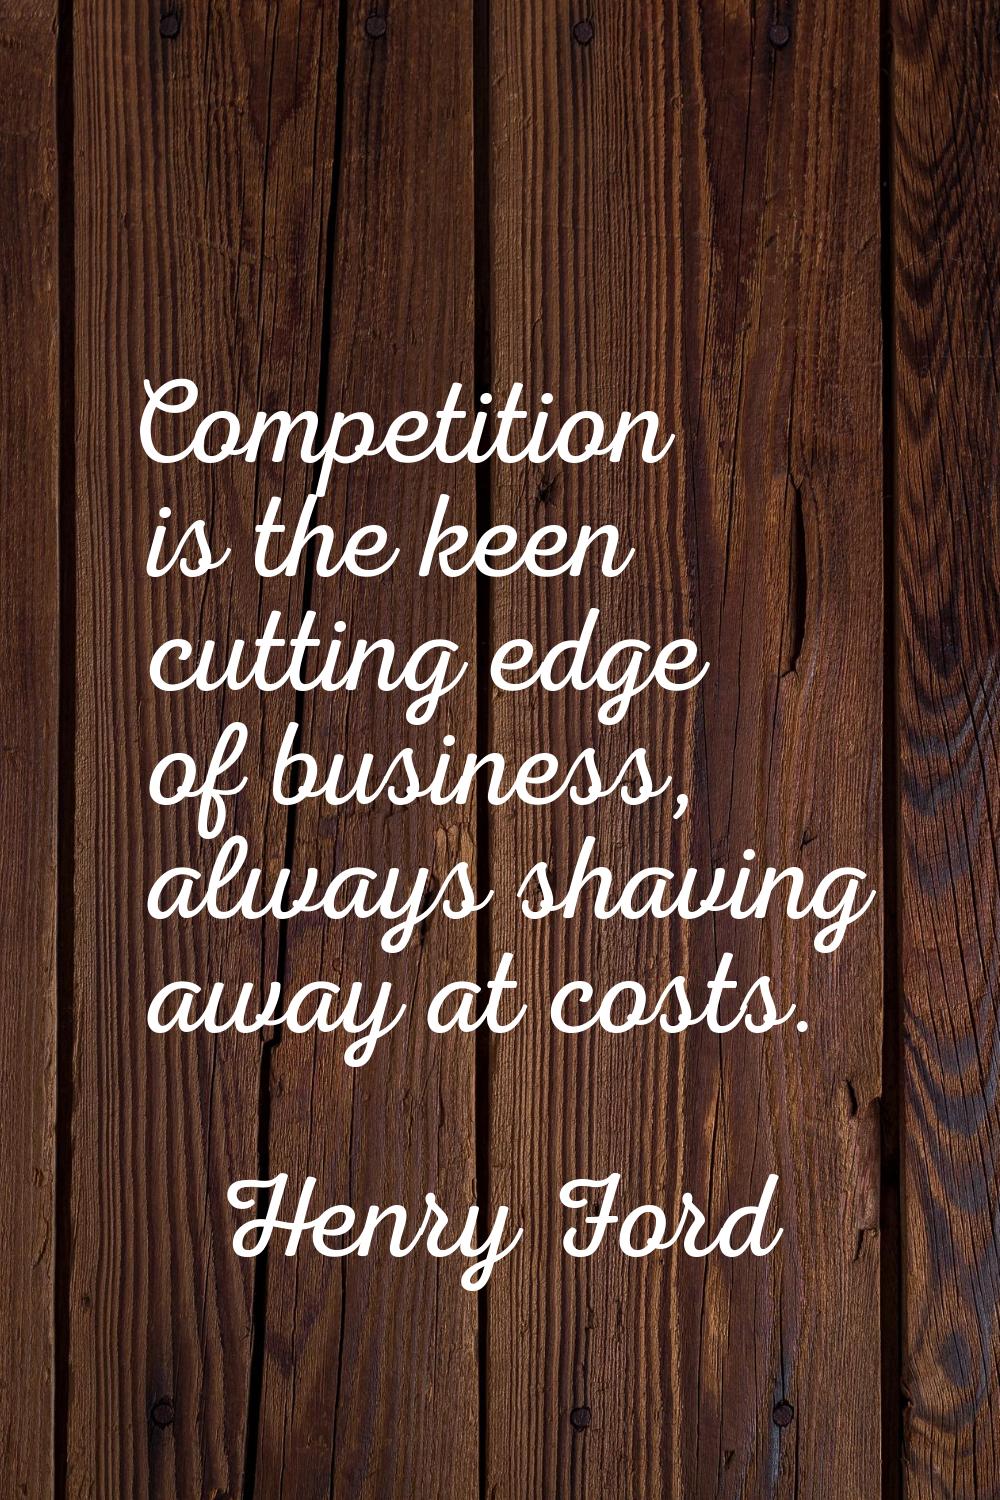 Competition is the keen cutting edge of business, always shaving away at costs.